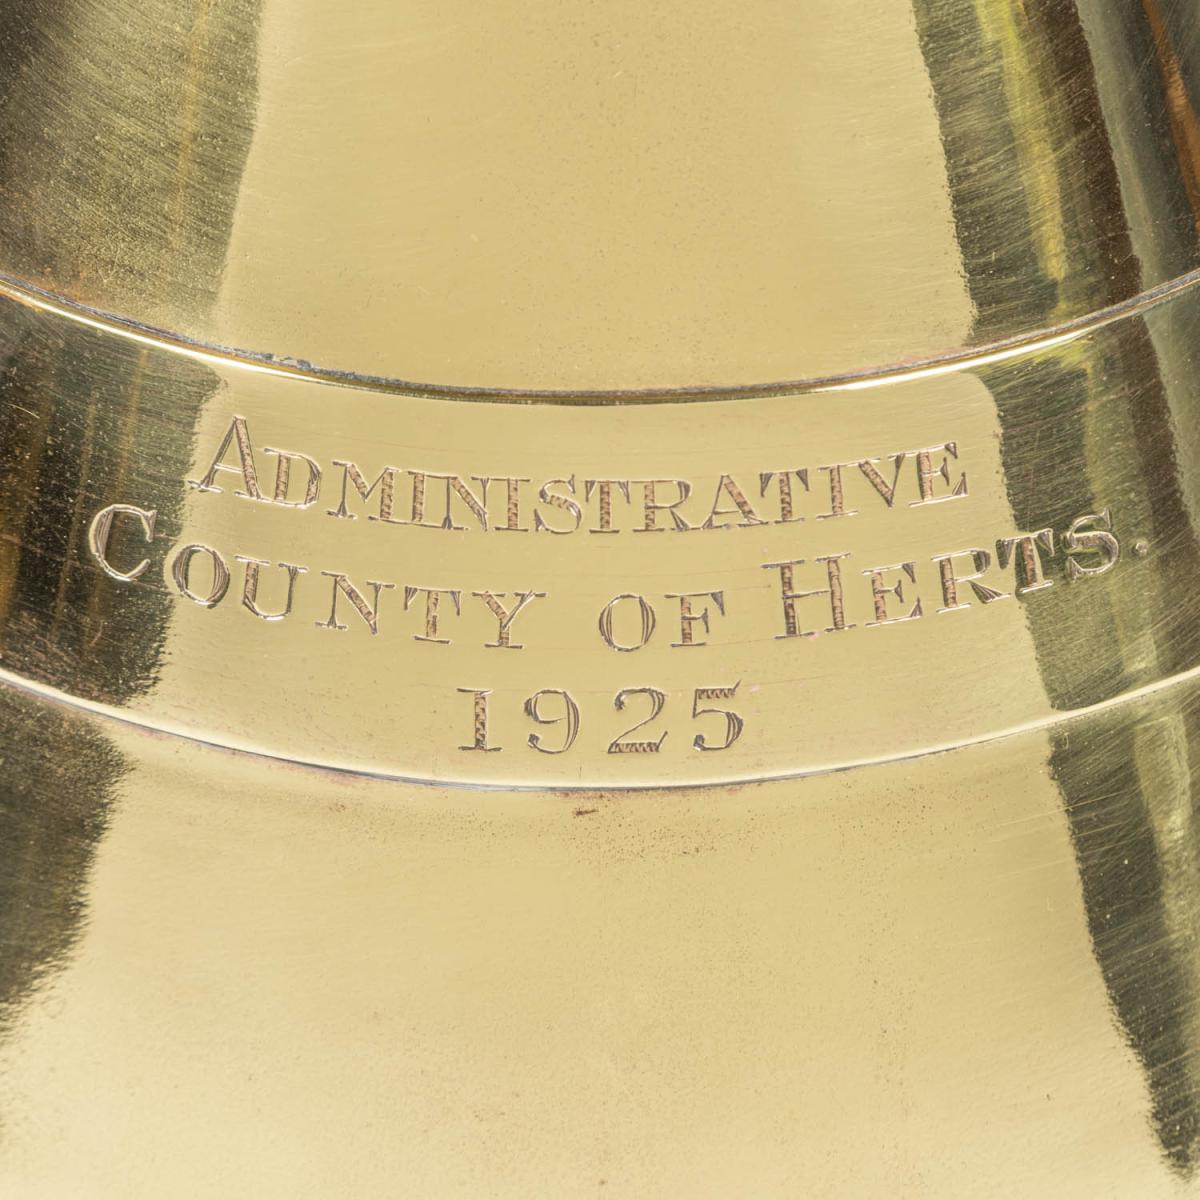 3 gallon measure by Avery made for the County Borough of Hertfordshire